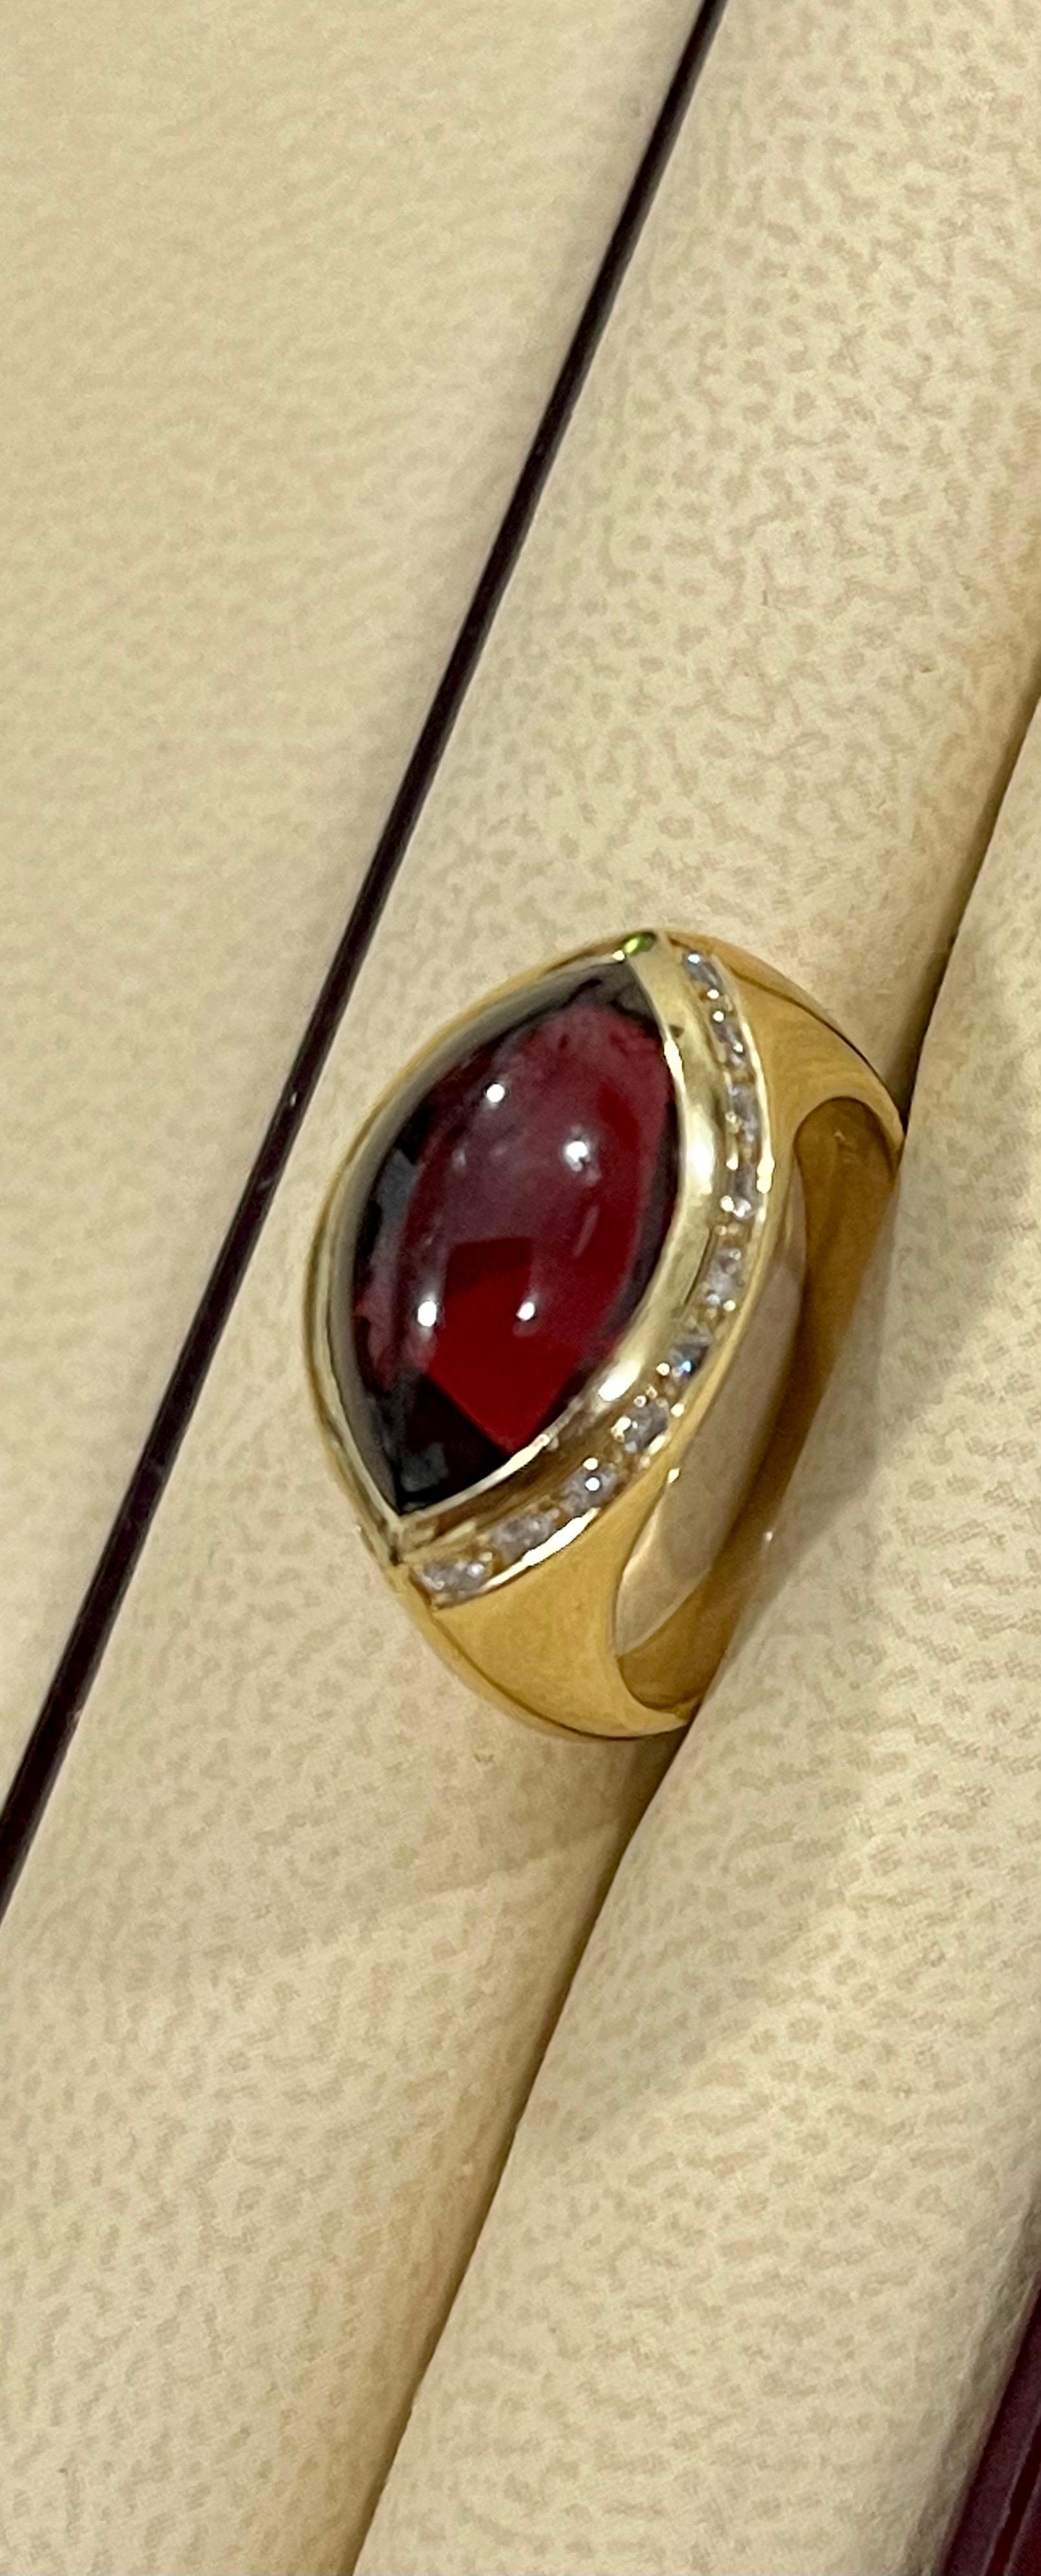 Marquise Shape Rhodolite Garnet and  Diamond Ring 18 Karat  Yellow Gold, Estate , size 6
This spectacular Ring consisting of a single Marquise  Shape High quality Rhodolite Garnet approximately 4 Carat.  The  Garnet ring has approximately 0.75 ct of